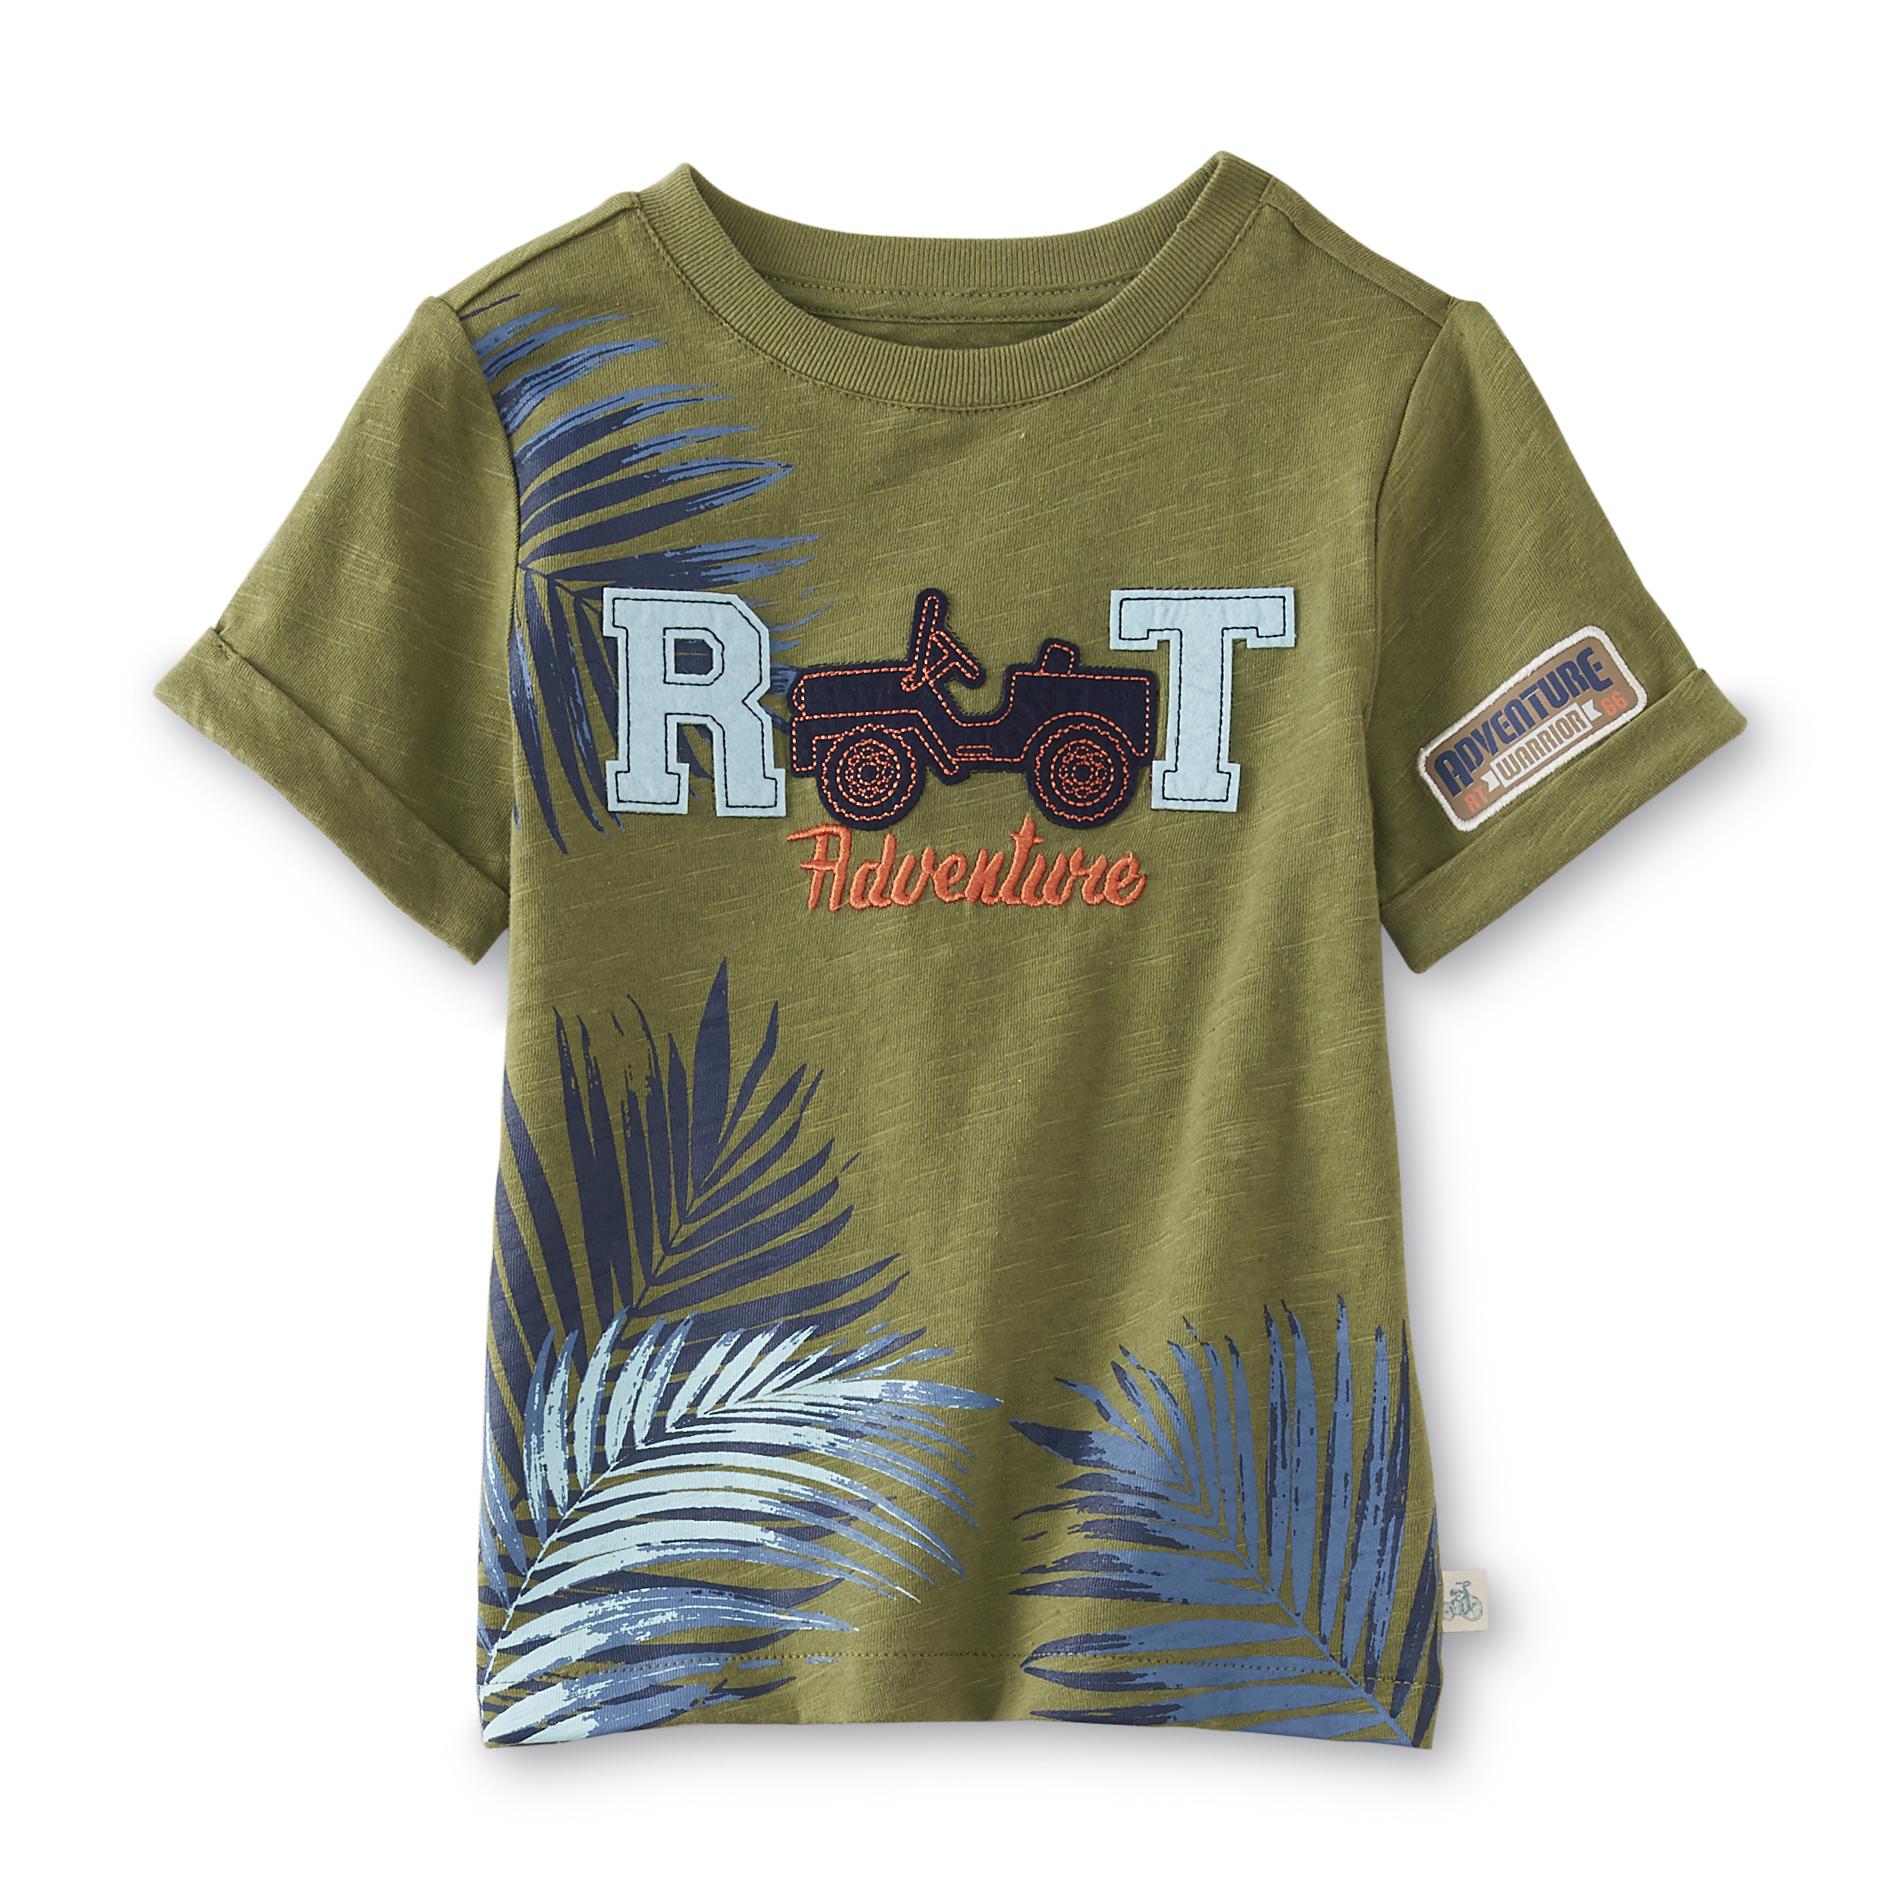 Route 66 Baby Infant & Toddler Boy's Graphic T-Shirt - Adventure